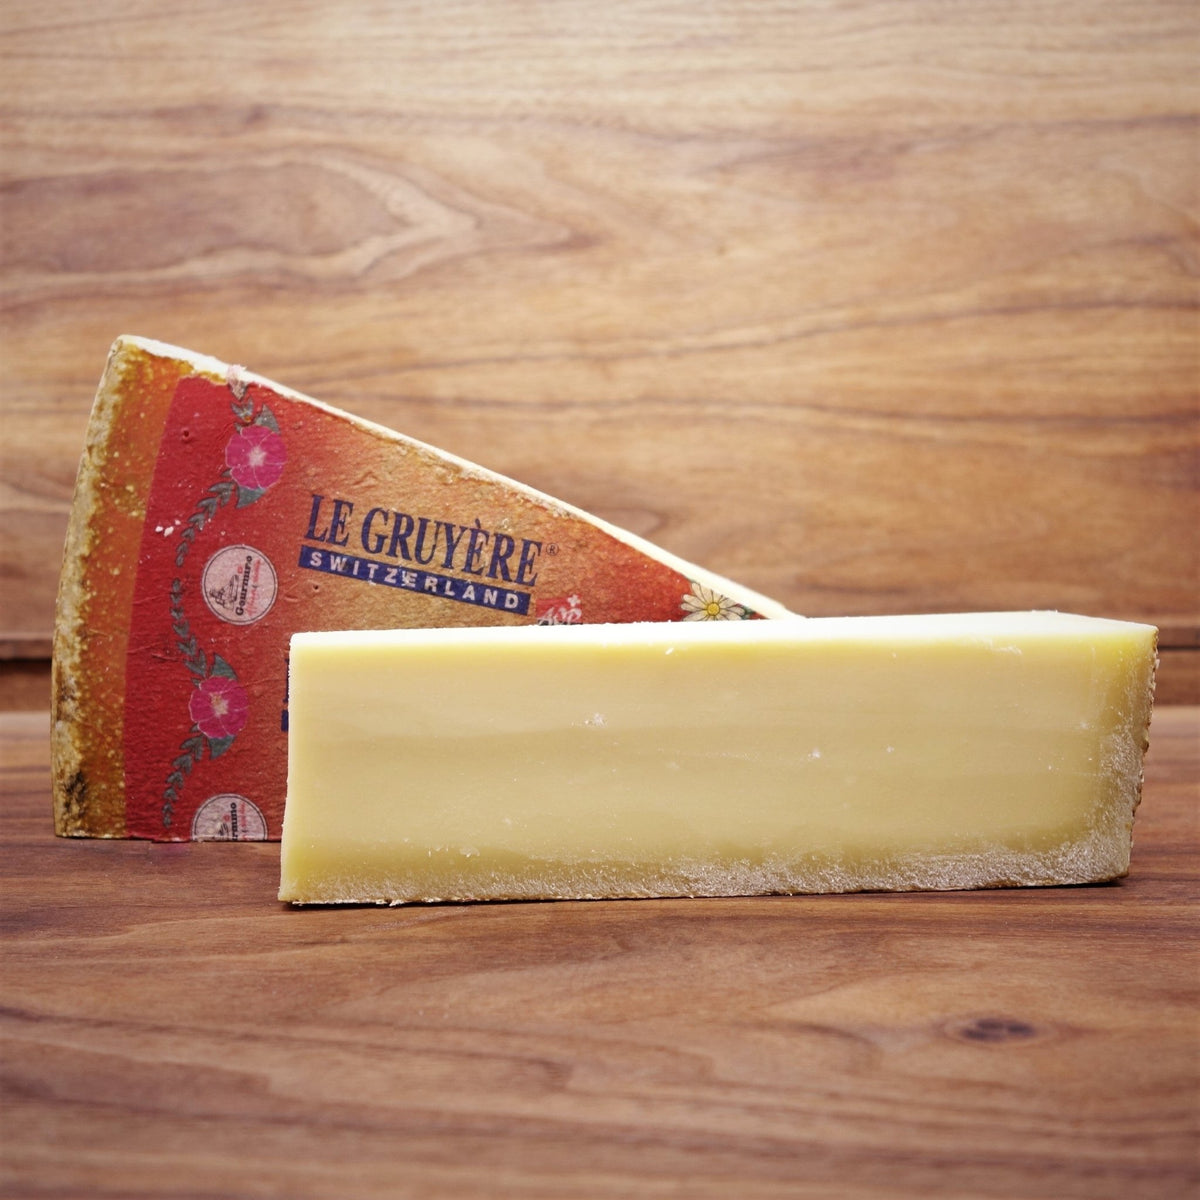 Le Gruyère AOP - Characteristics - cheese - tradition - swiss